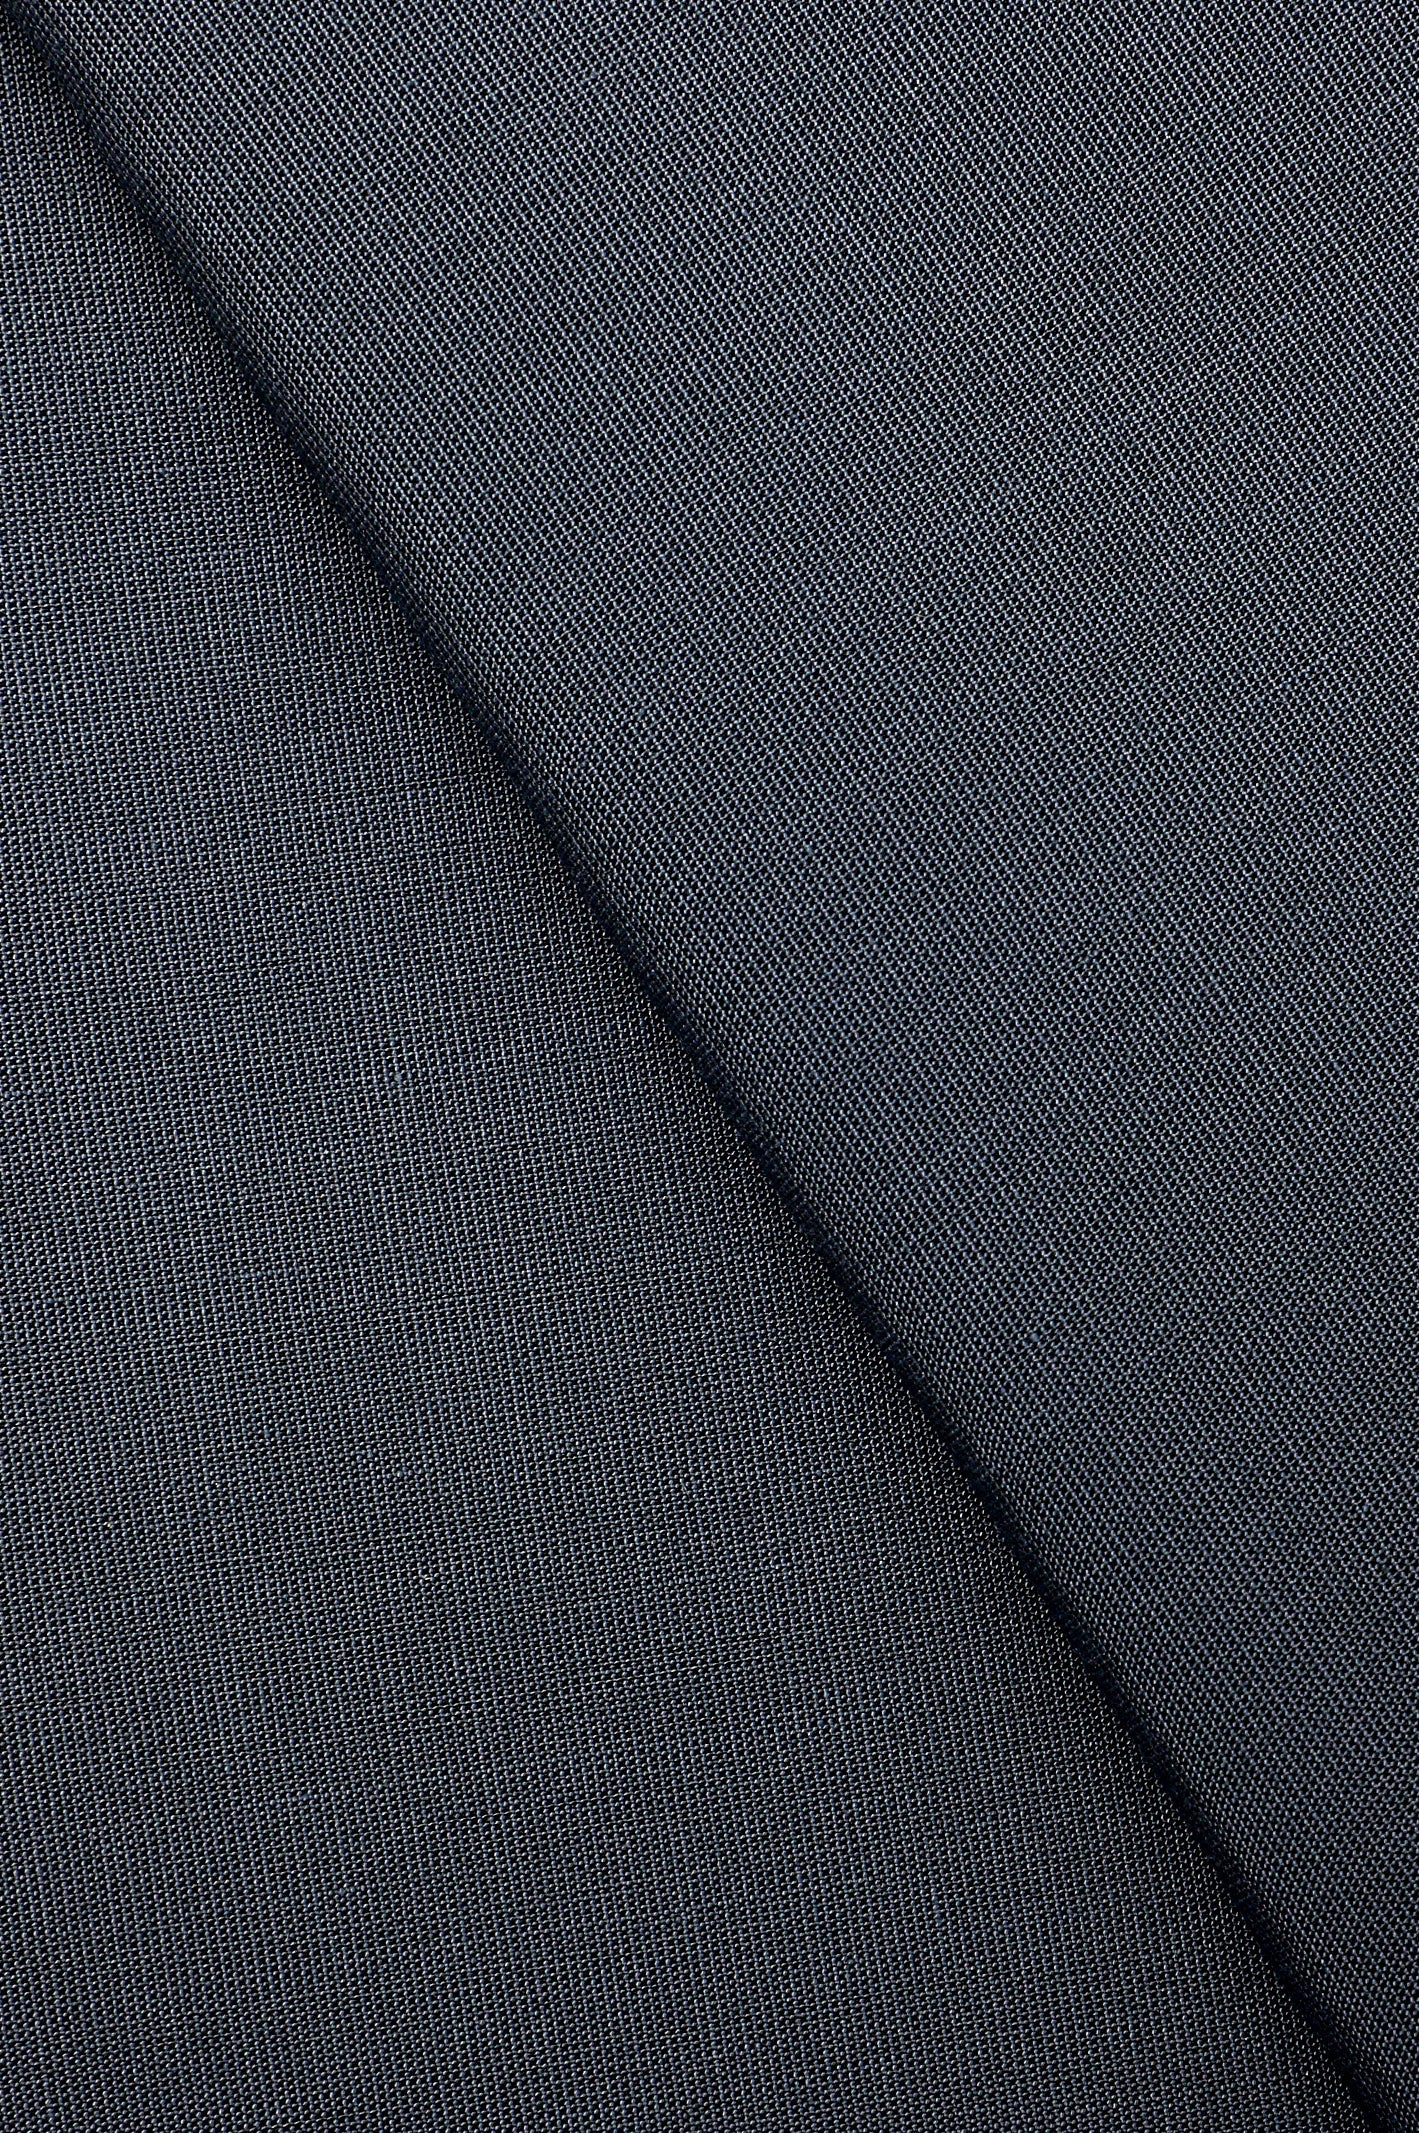 Unstitched Fabric for Men SKU: US0181-D-GREY - Diners